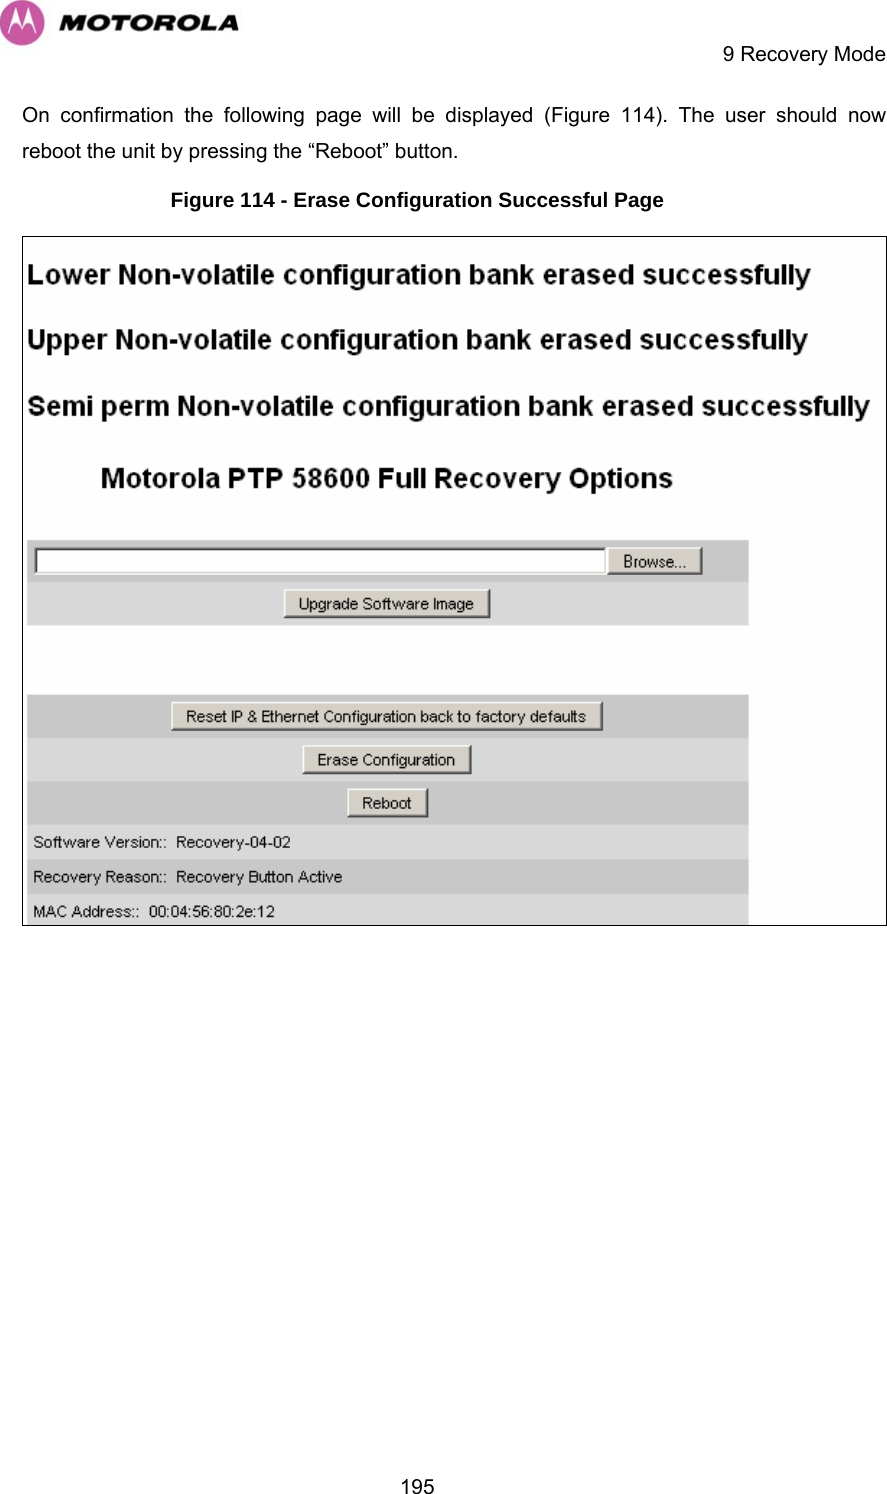     9 Recovery Mode  195On confirmation the following page will be displayed (Figure 114). The user should now reboot the unit by pressing the “Reboot” button. Figure 114 - Erase Configuration Successful Page   